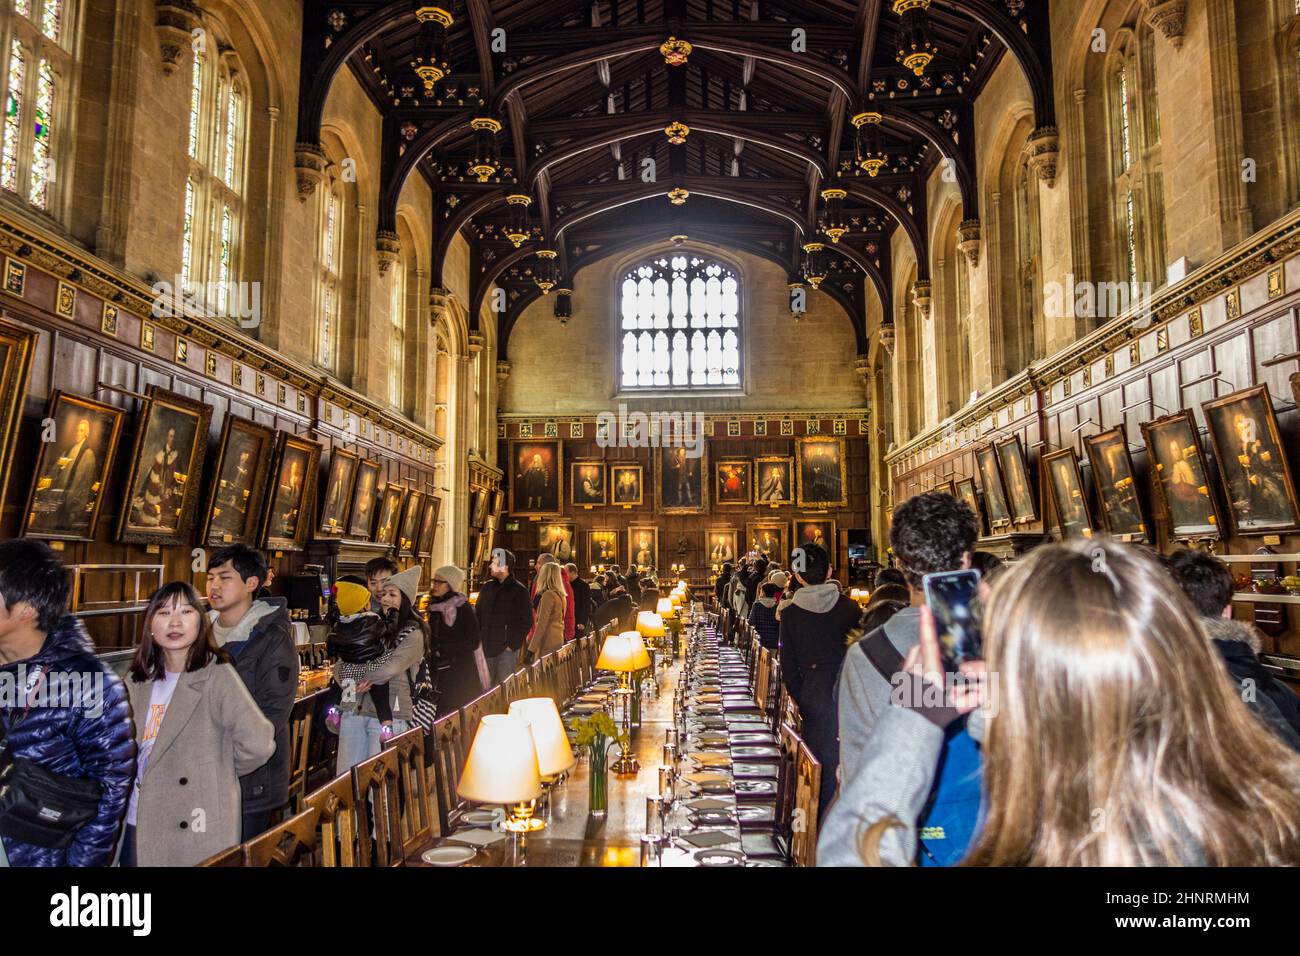 people visit the great hall of Christ Church, University of Oxford, England Stock Photo